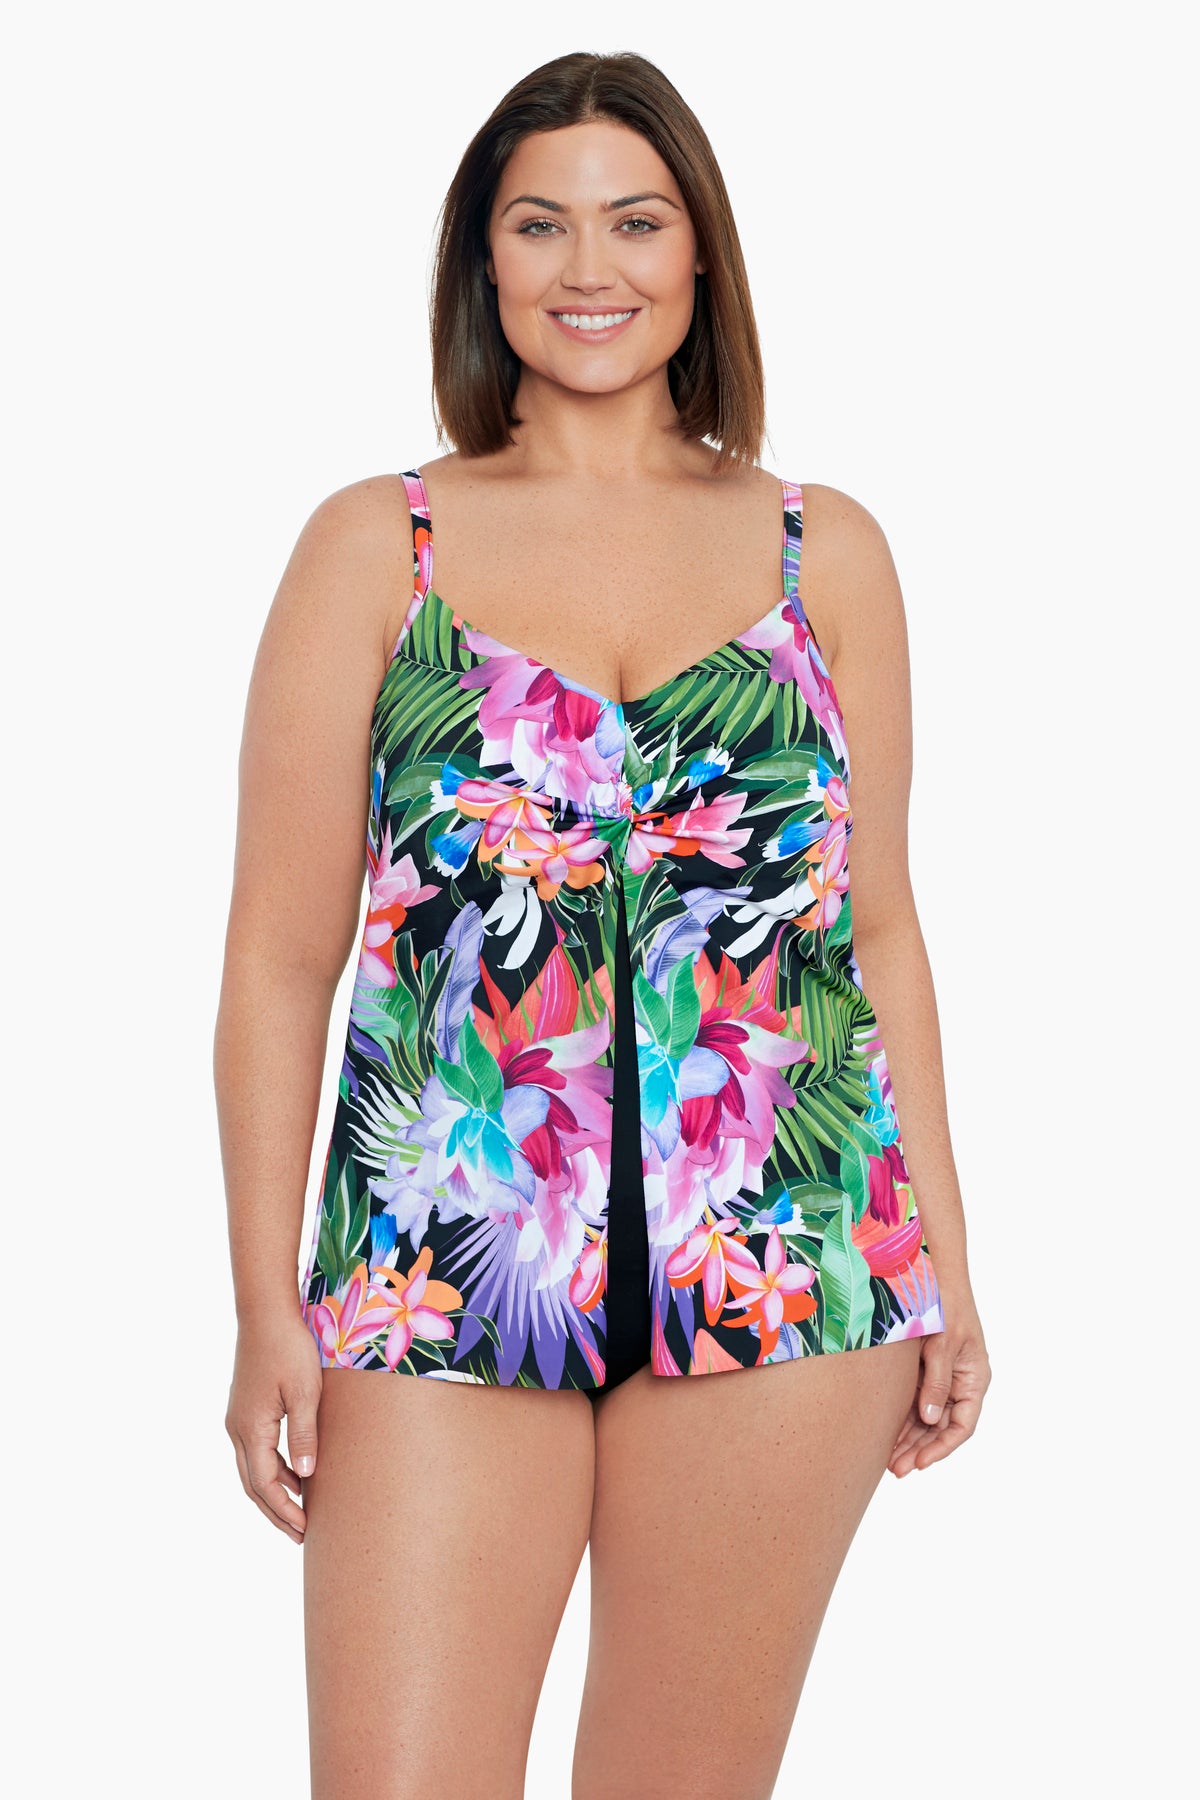 Shapesolver Plus Size Knotted Flyaway Fauxkini One Piece Swimsuit